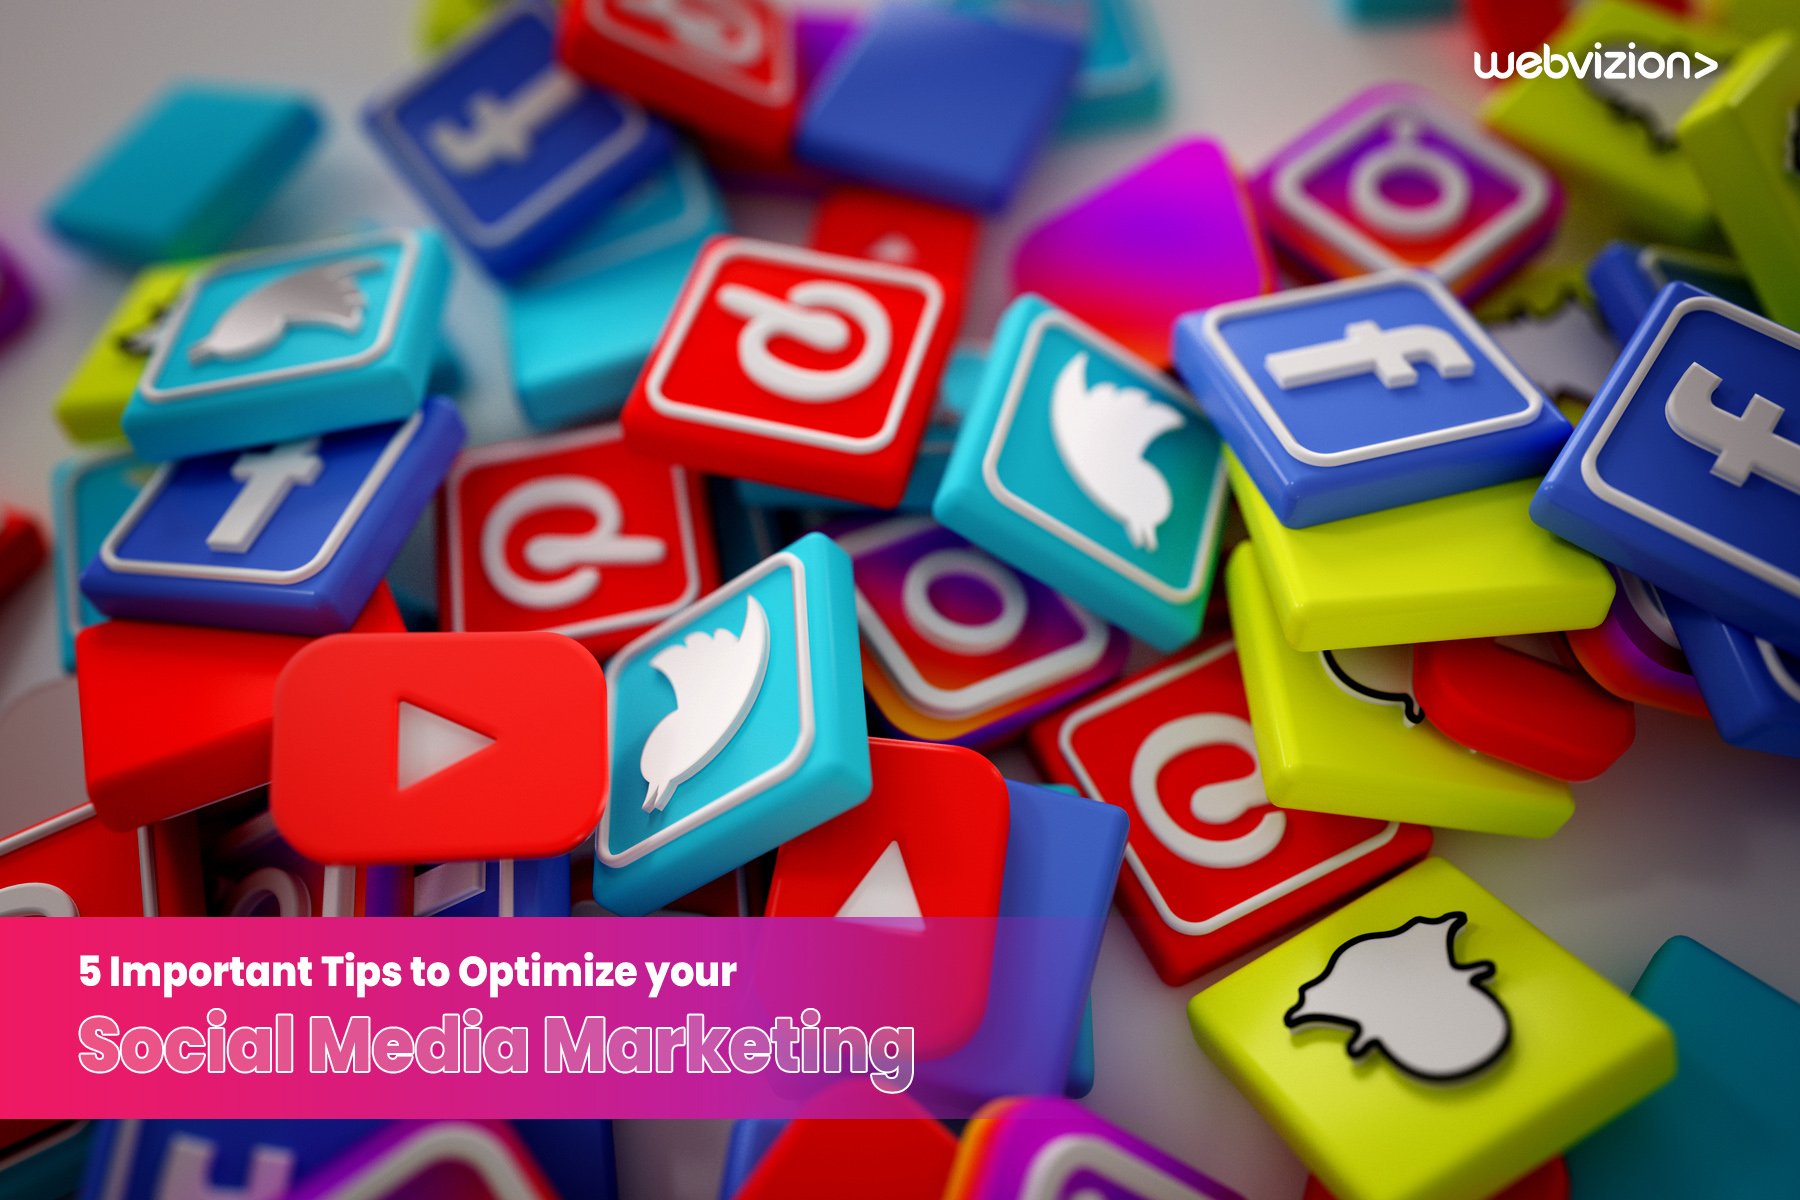 5 Important Tips to Optimize your Social Media Marketing